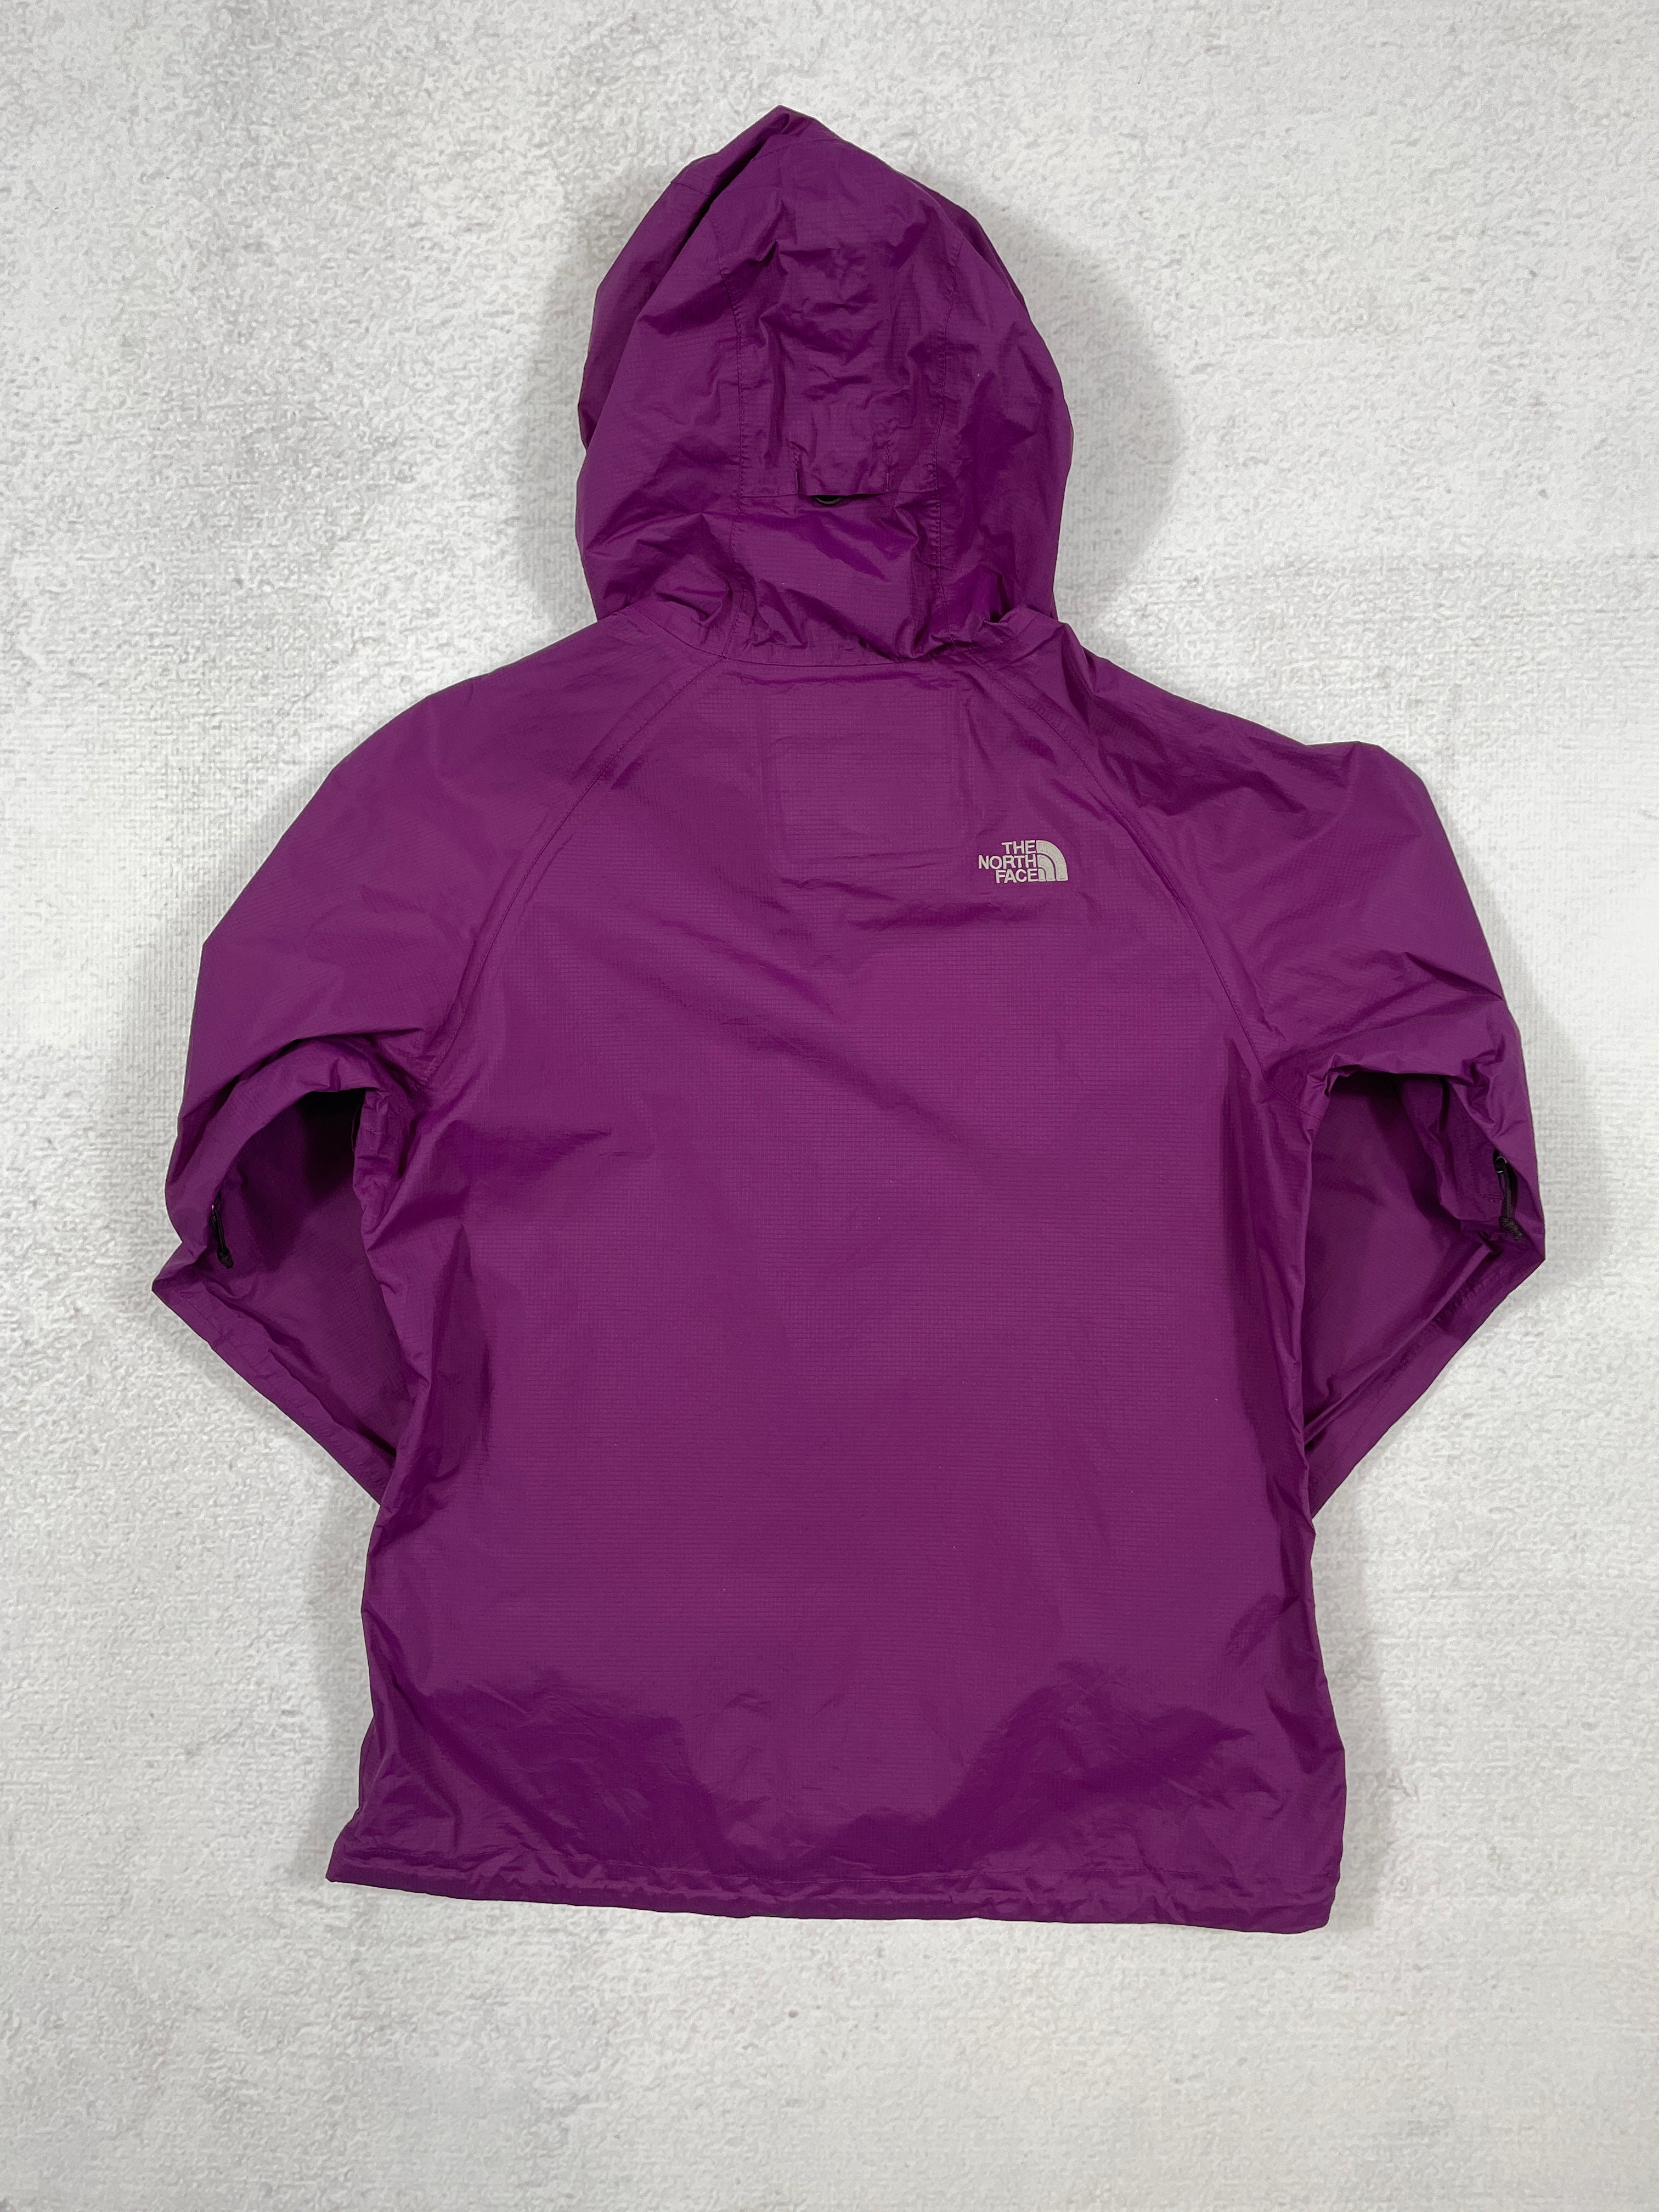 Vintage The North Face HyVent Windbreaker - Women's Small